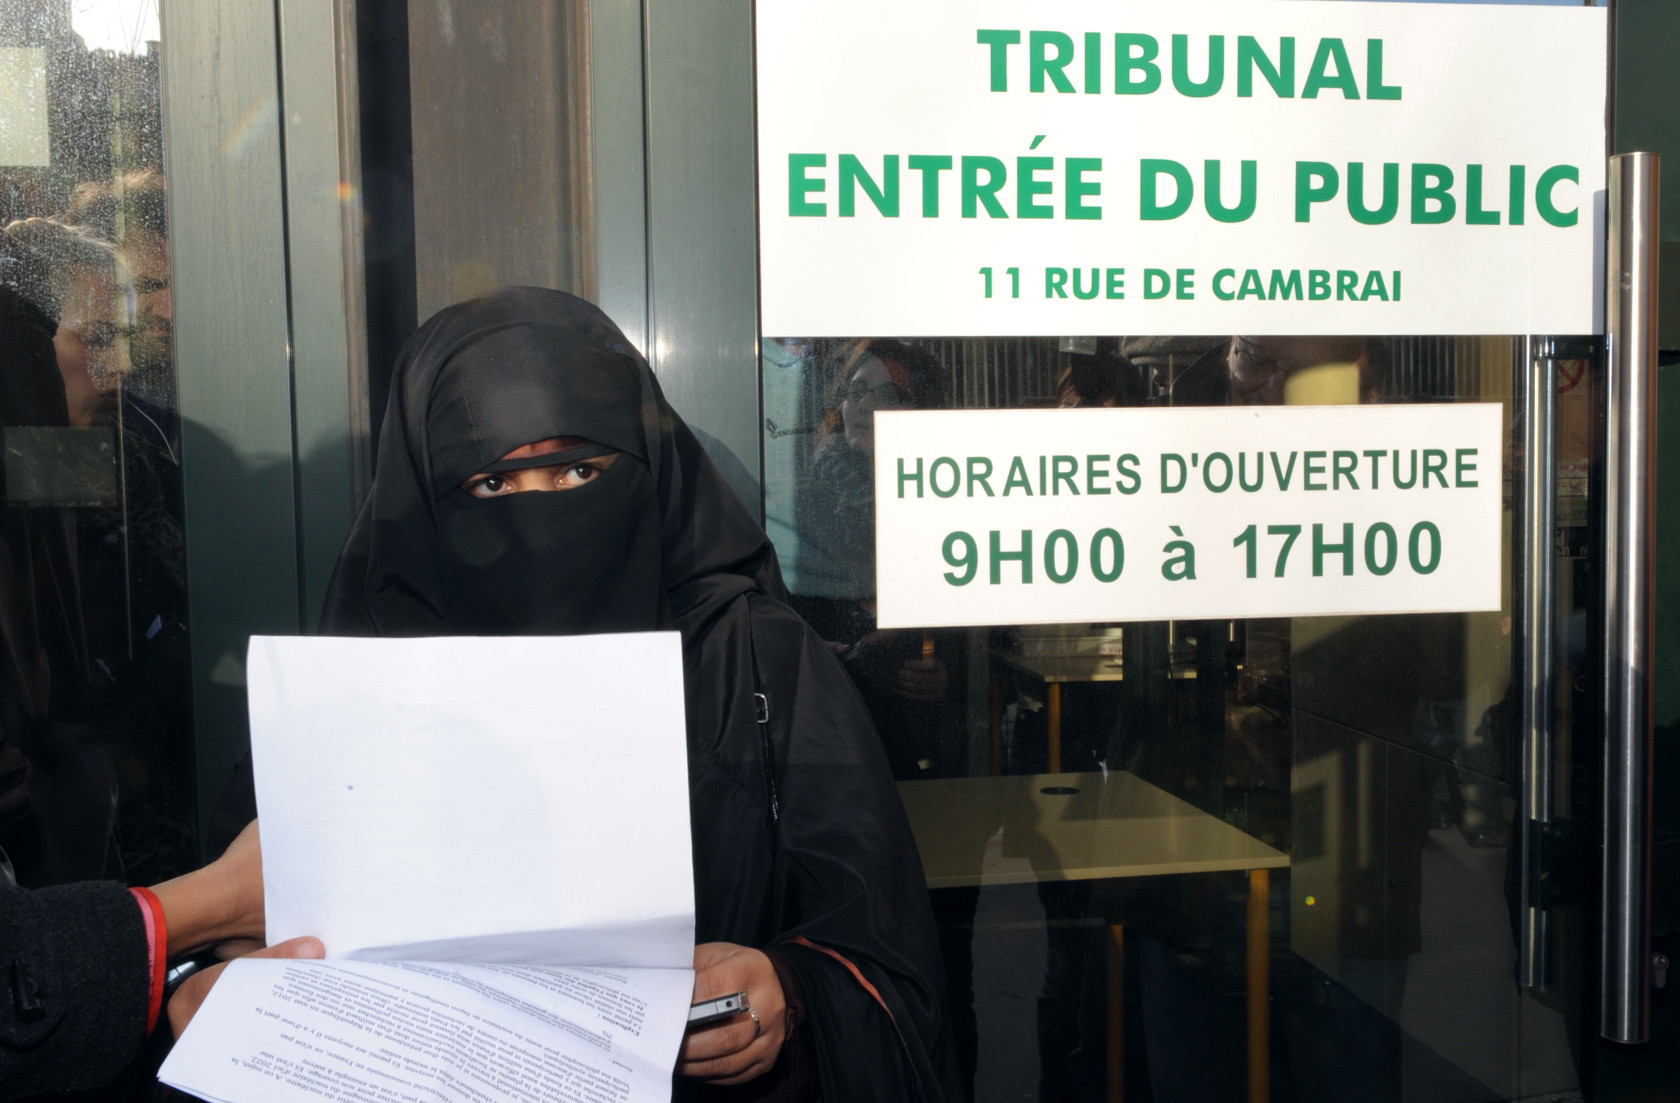 In 2010 France controversially banned the niqab in public ©Getty Images